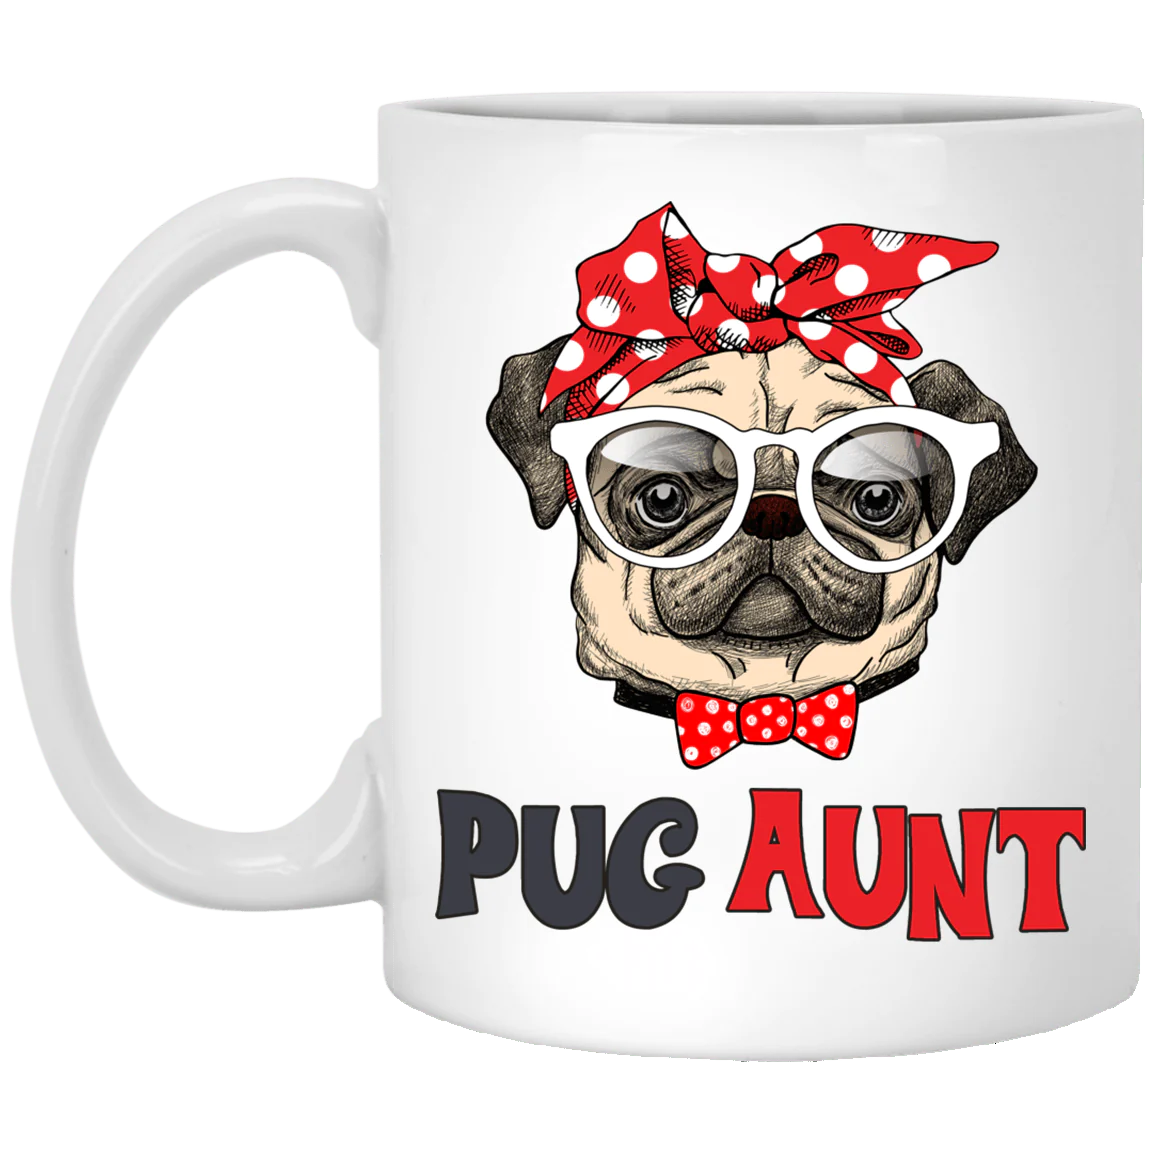 Pug Aunt Mug Cool Pug Gifts For Puggy Puppies Lover